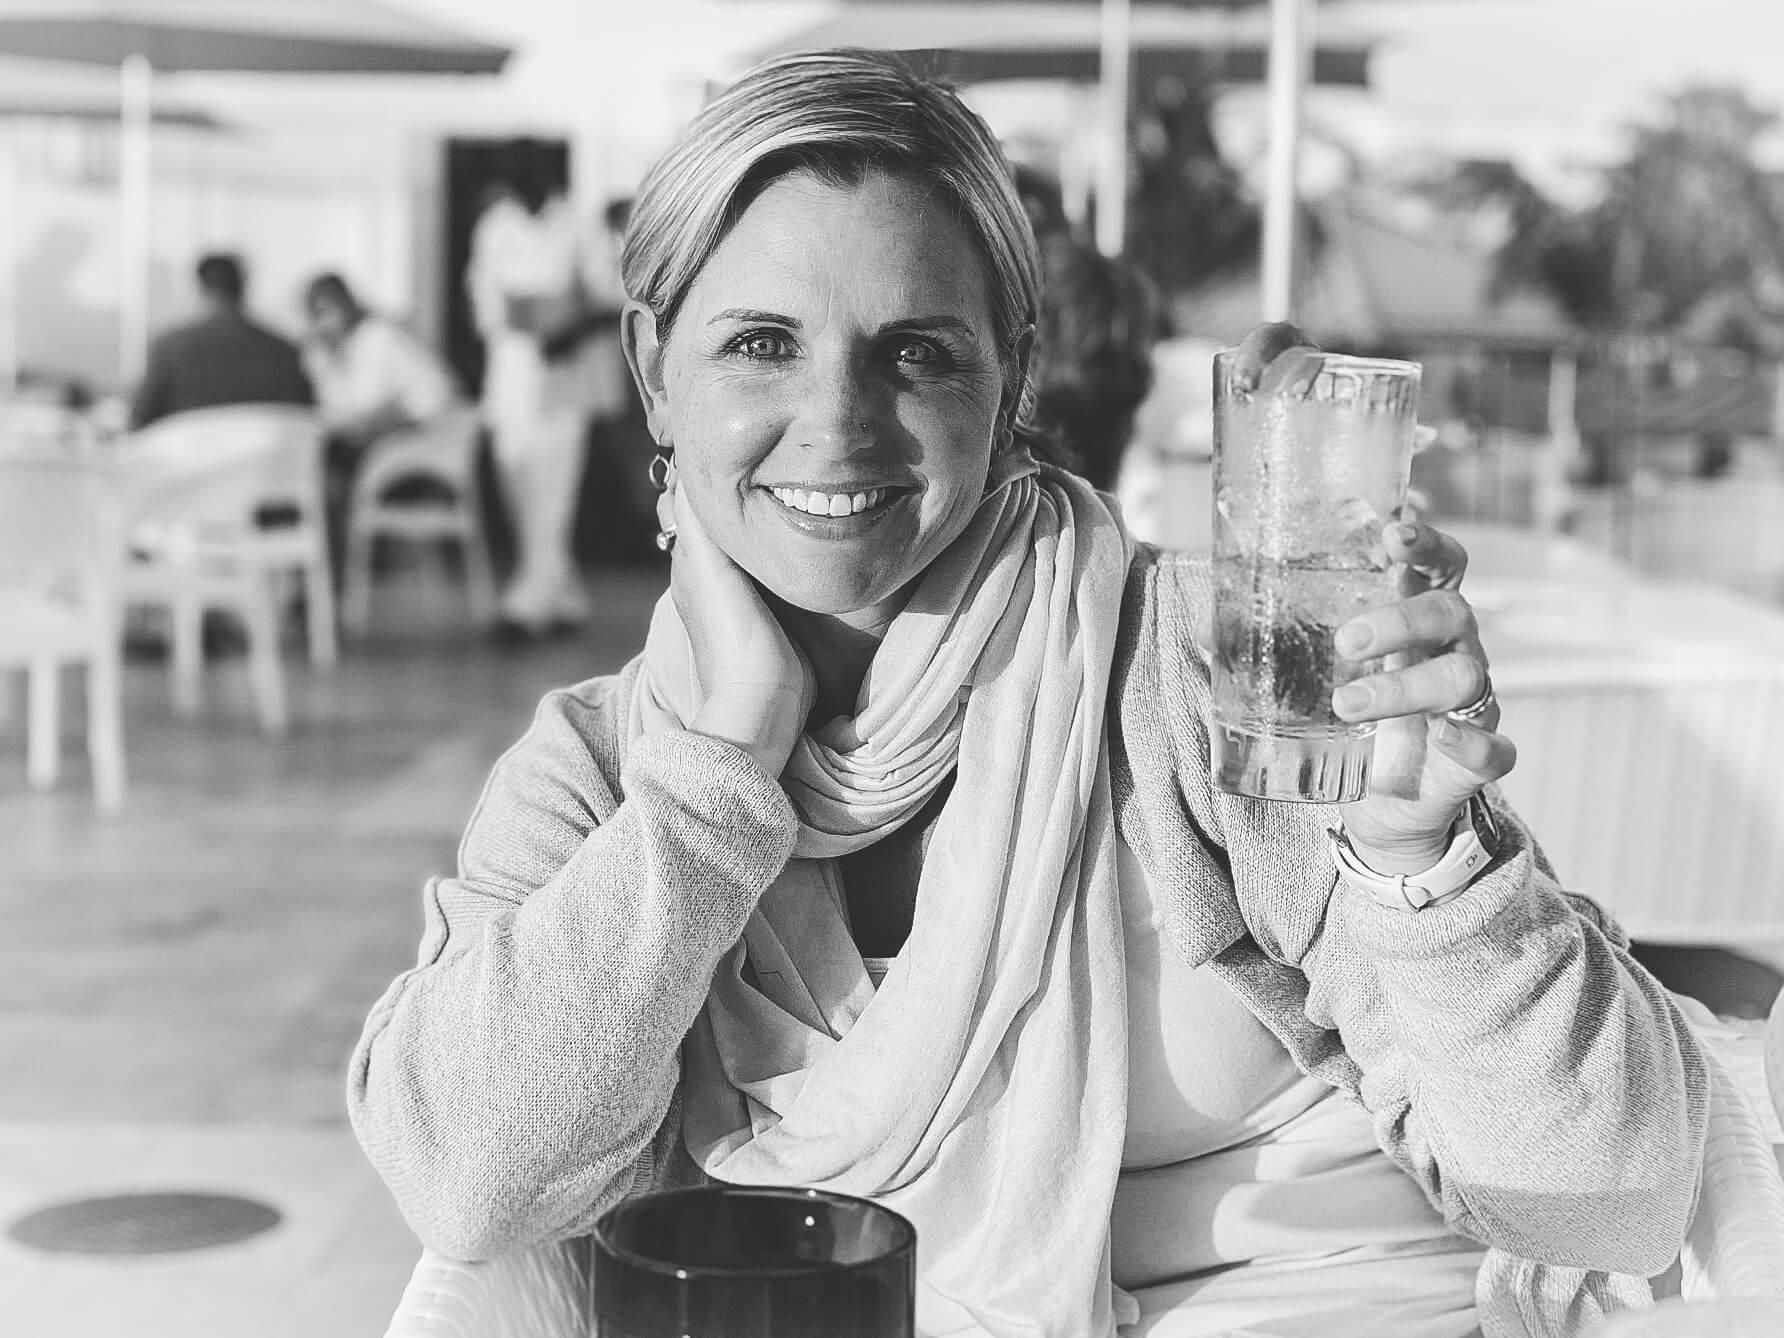 Black and white photo of a white woman with short blond hair sitting in a tropical setting outdoor restaurant. She's seated at a table holding up a drink in her left hand.